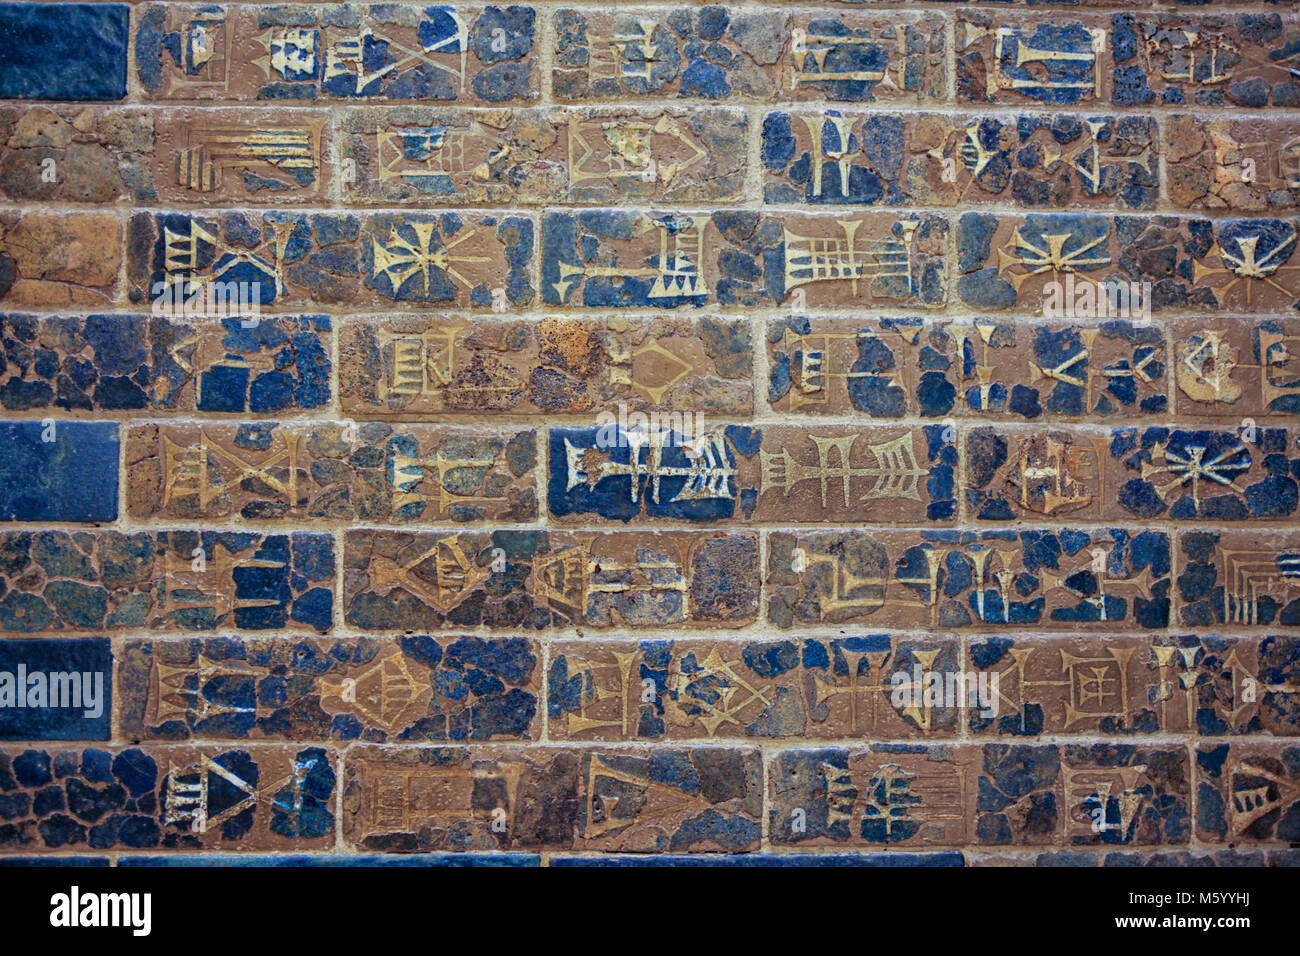 Building Inscription of King Nebukadnezar II, 604-562 BC. During the excavations of Babylon, in the immediate vicinity of the Ishtar Gate, numerous fr Stock Photo